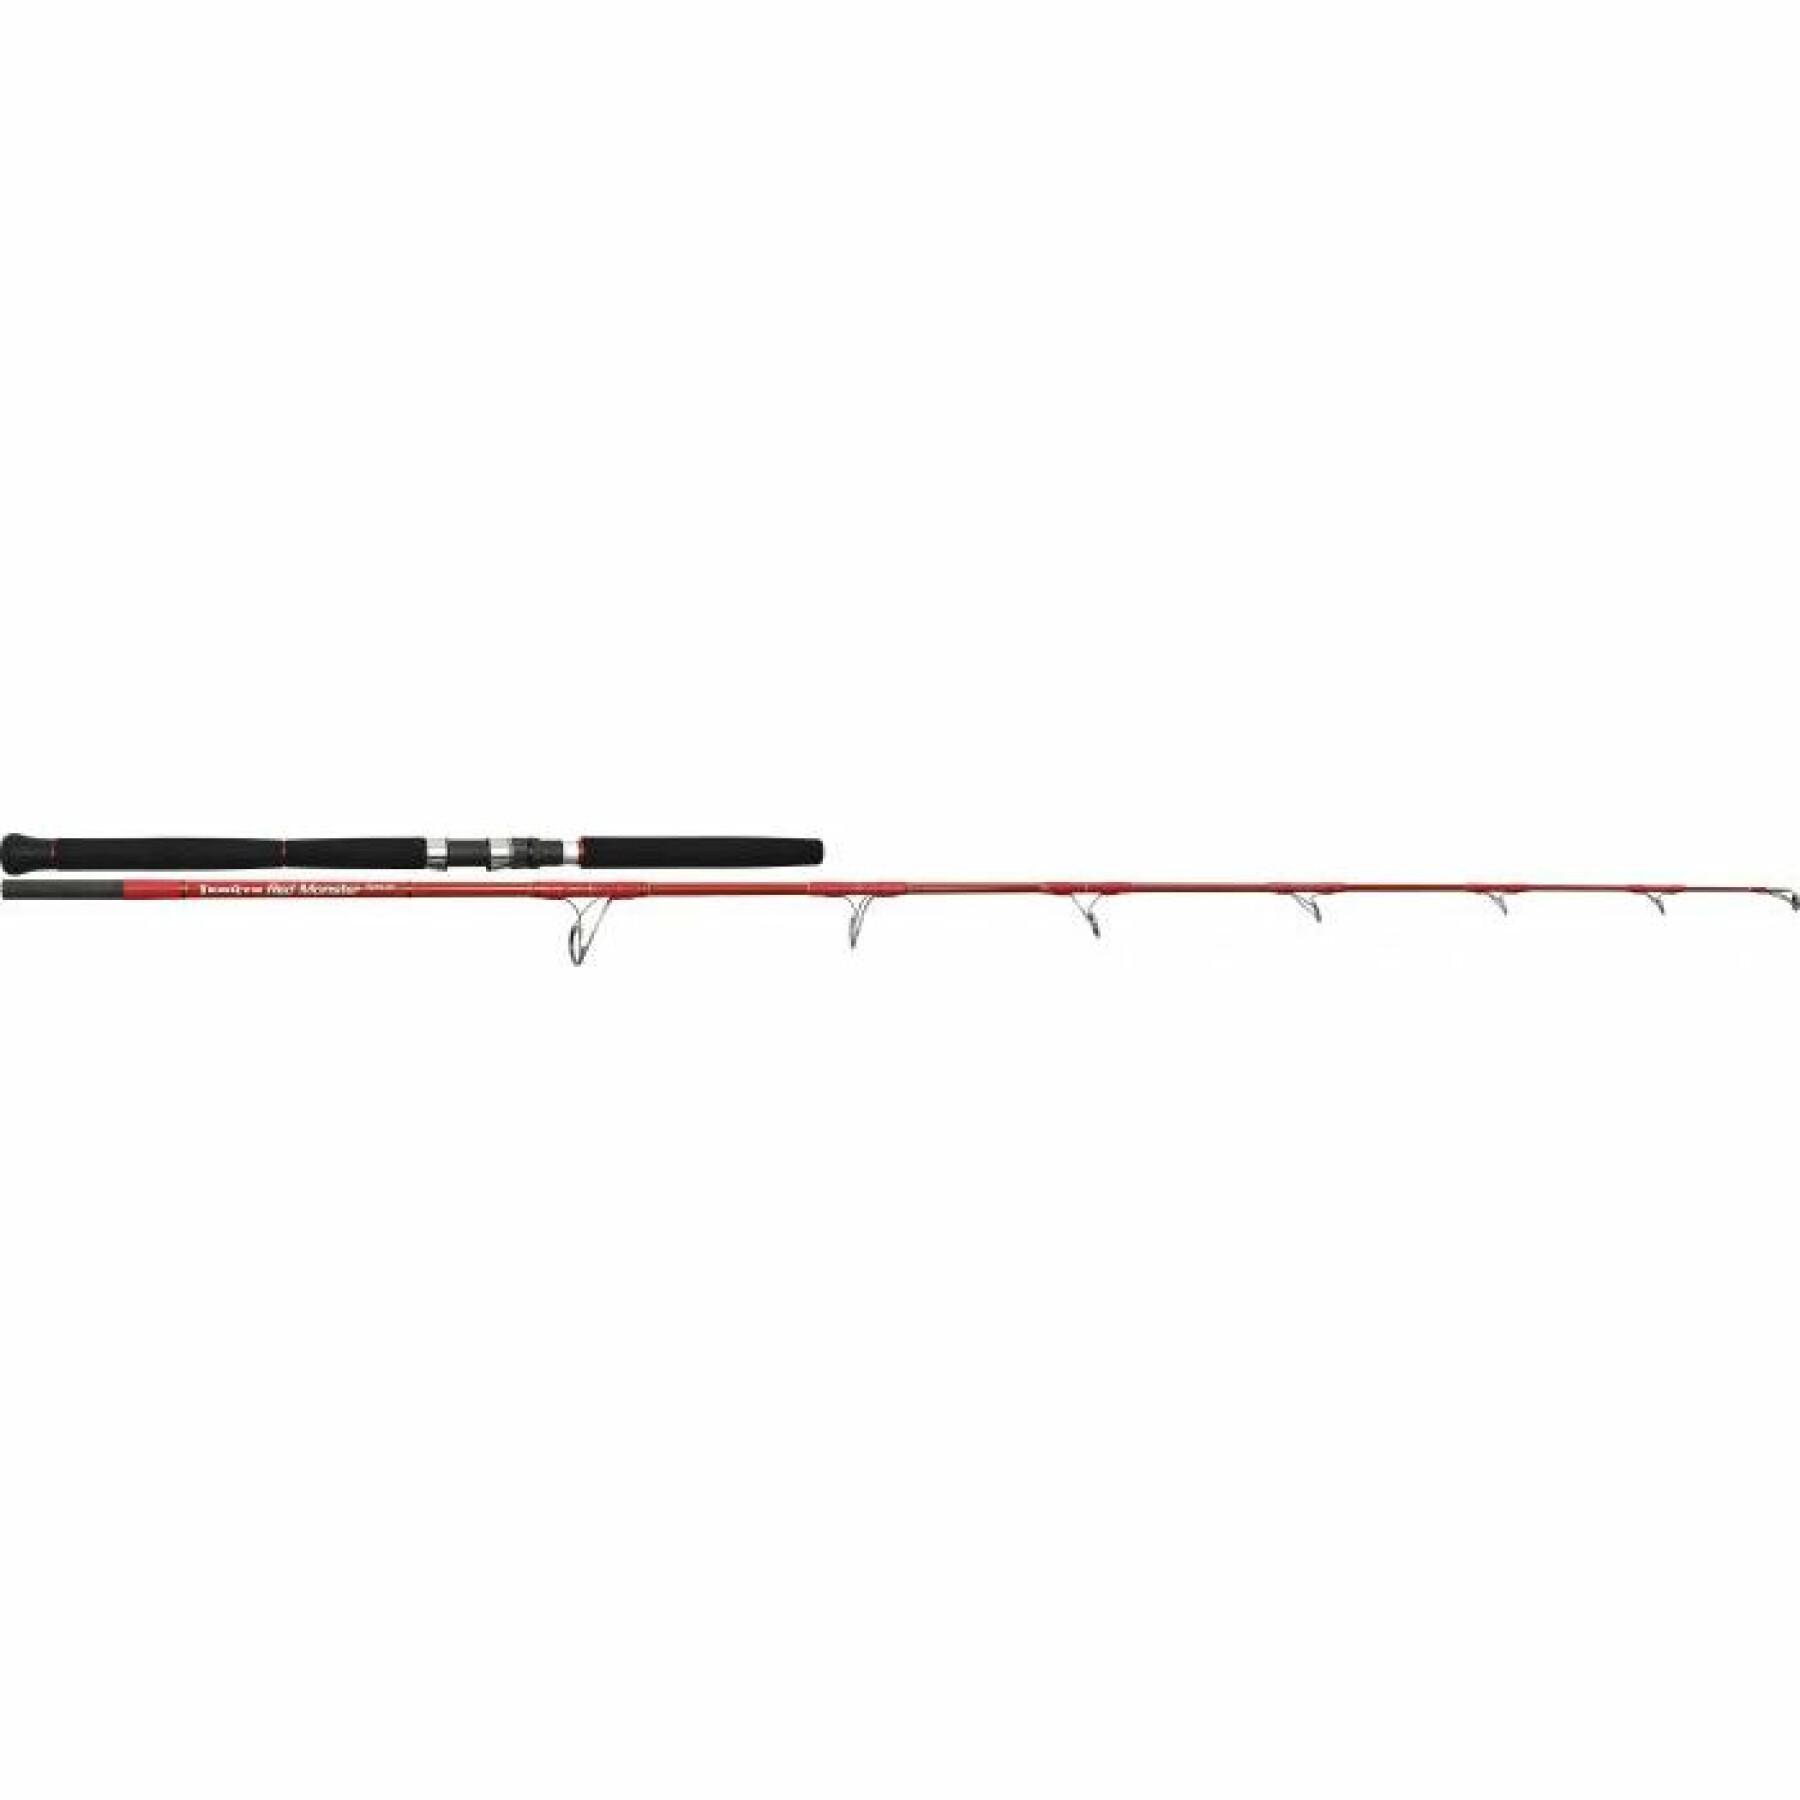 Spinstang Tenryu Red Monster Special 80-200g